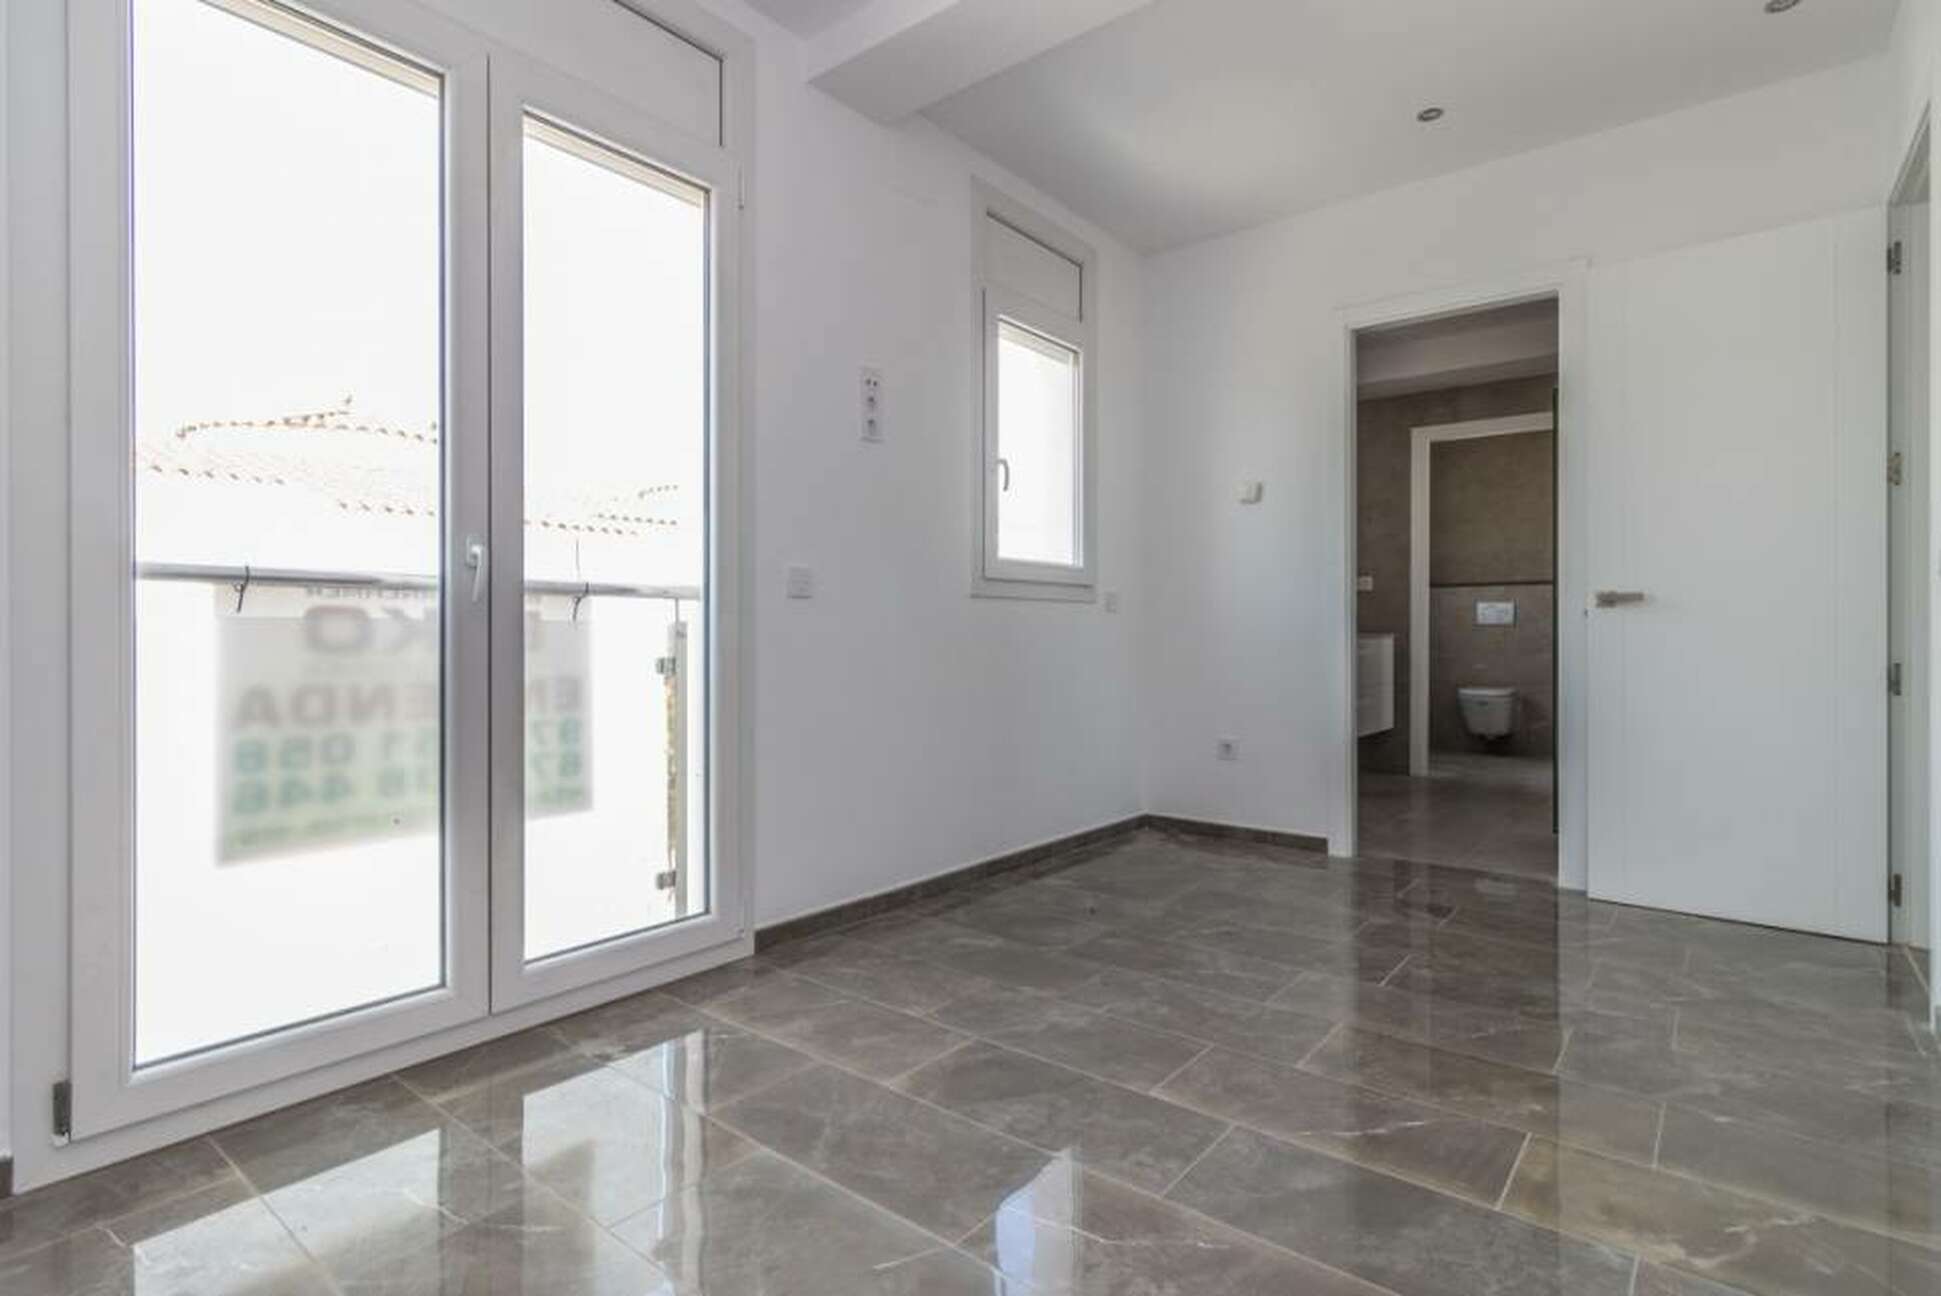 Beautiful new modern style house for sale in Empuriabrava